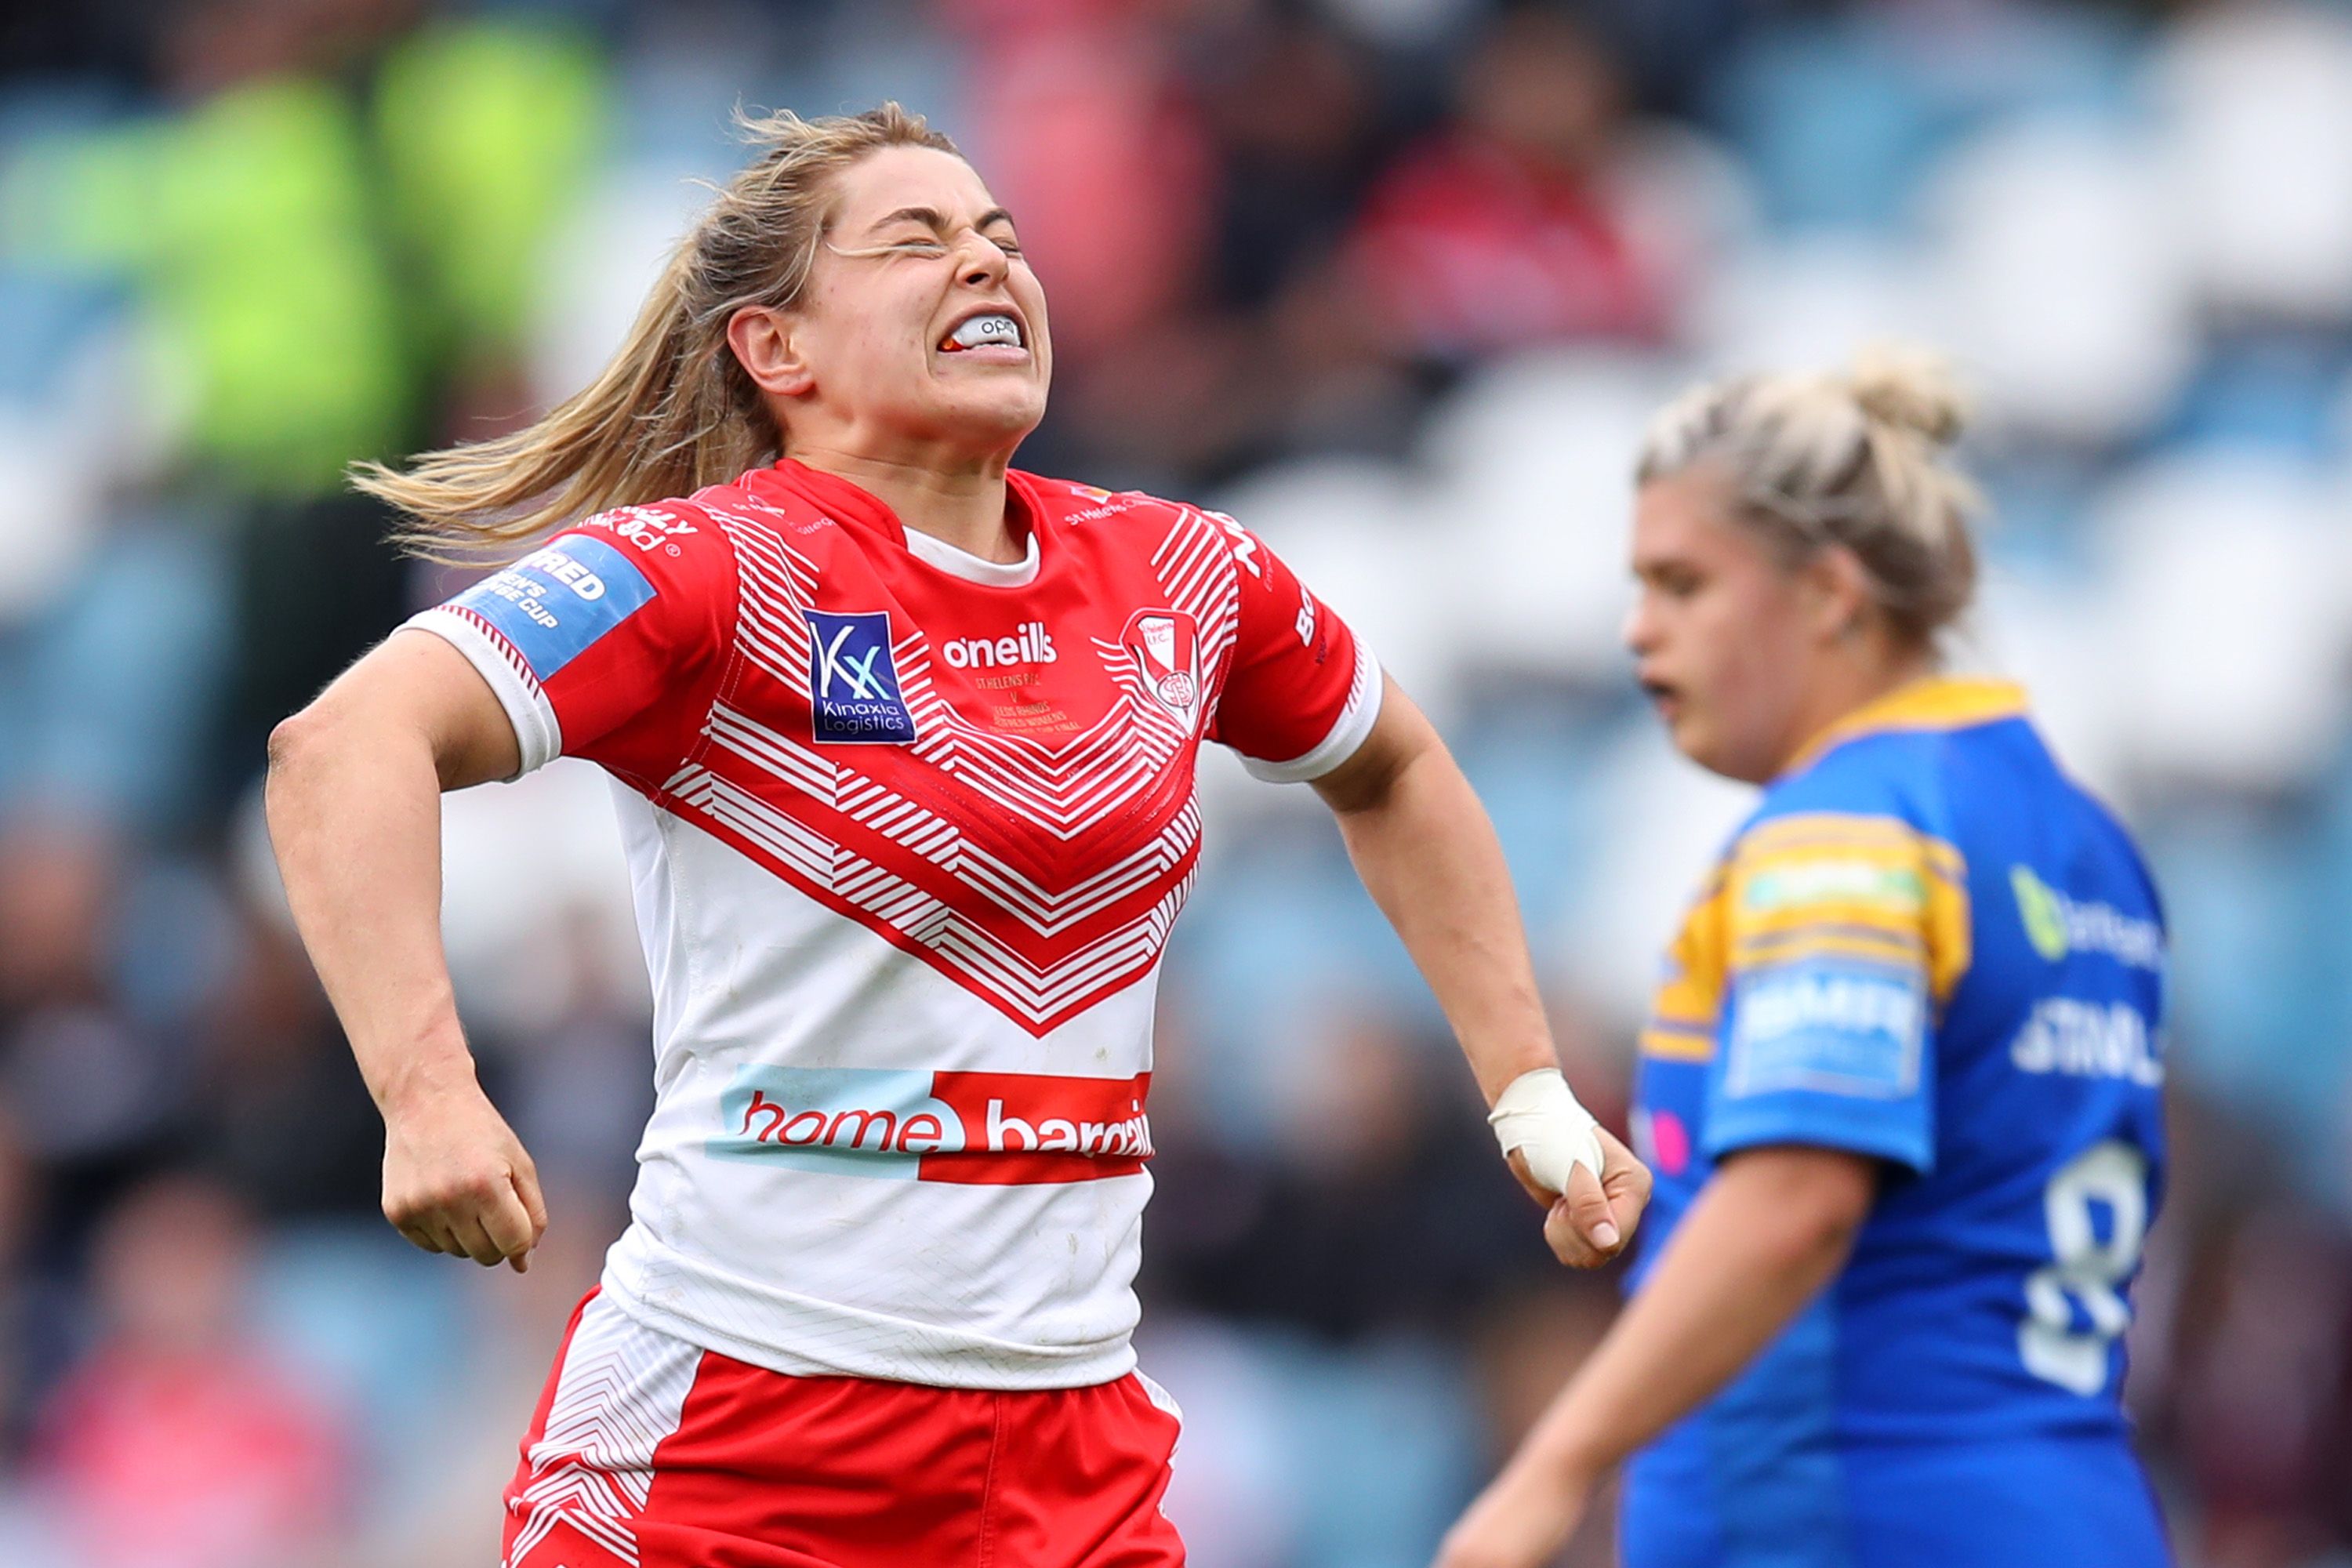 Emily Rudge playing for St. Helens 